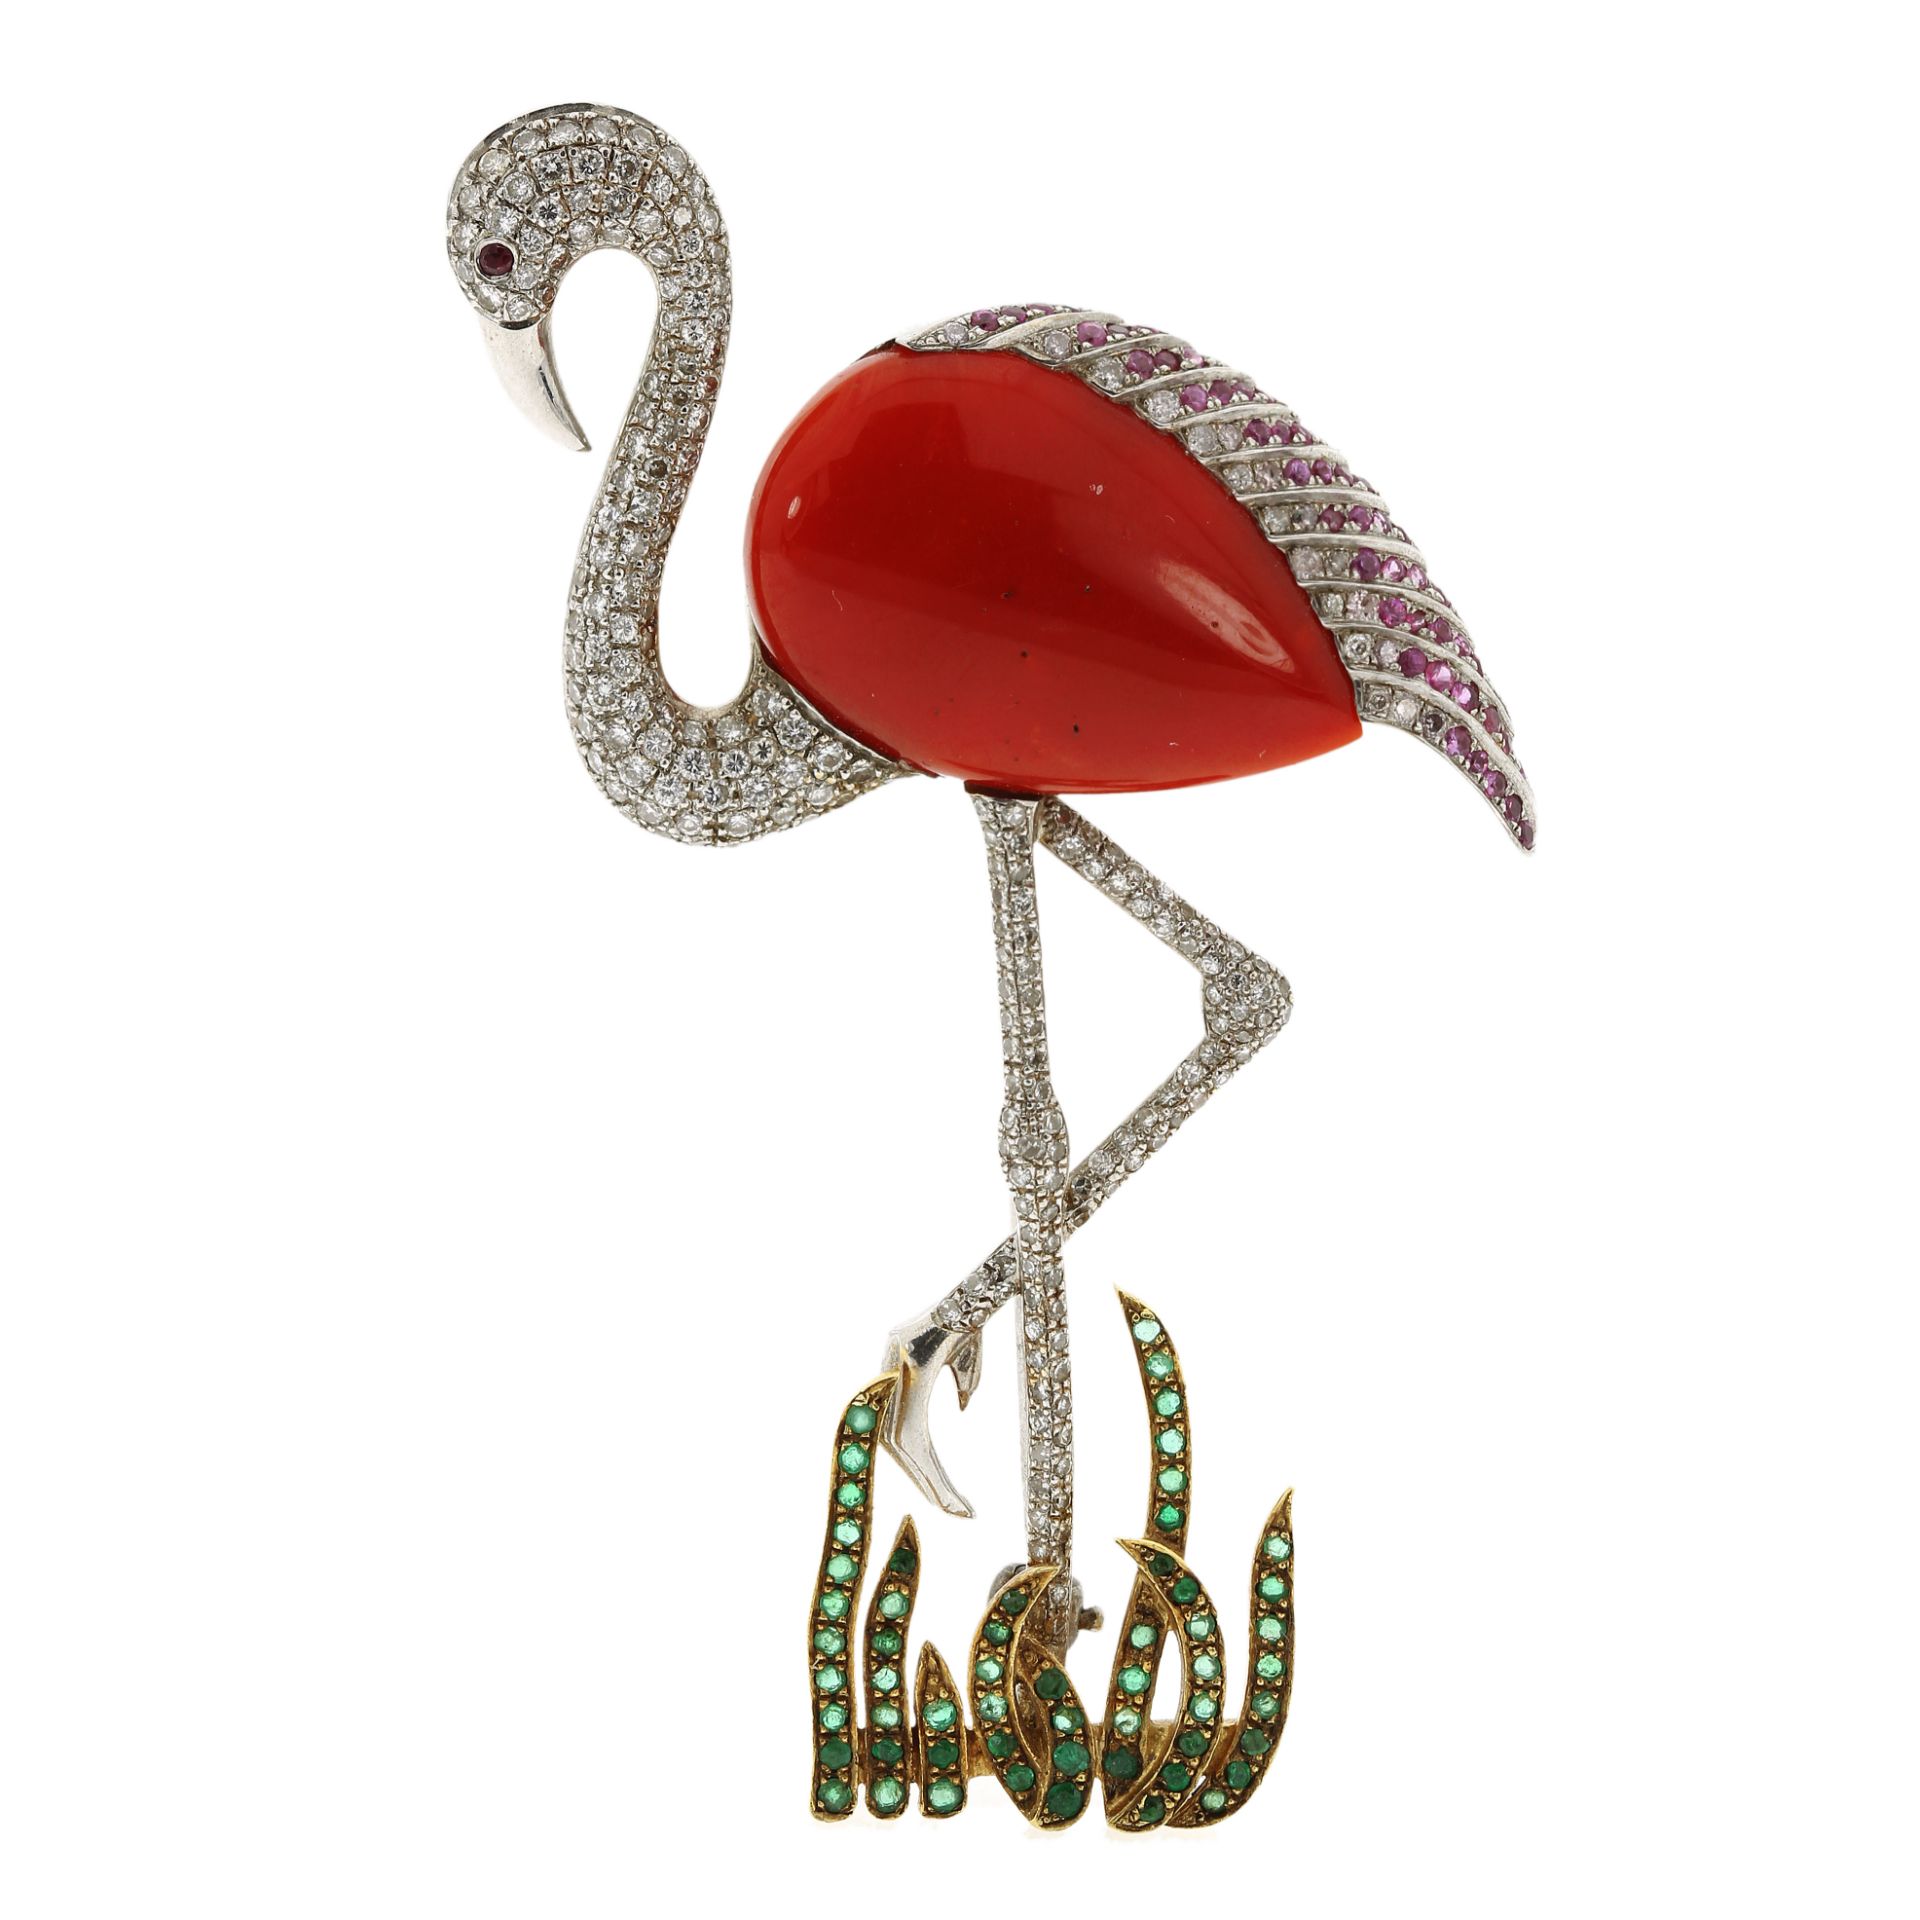 A VINTAGE CORAL, DIAMOND, EMERALD AND PINK SAPPHIRE FLAMINGO BROOCH in yellow and white gold, the